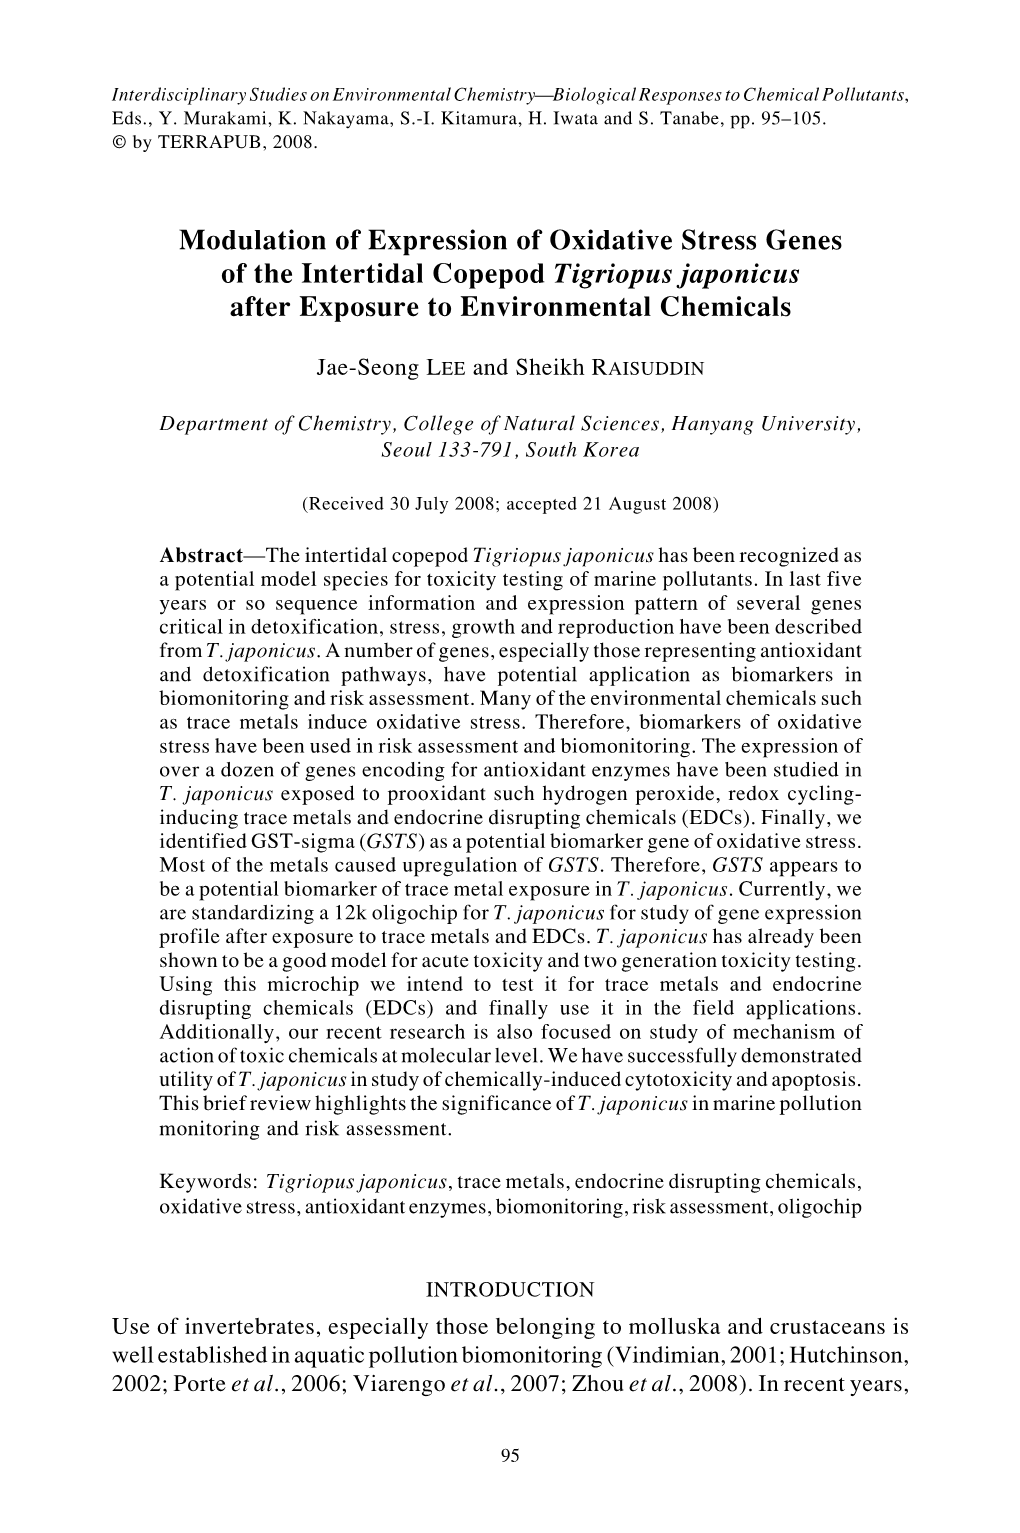 Modulation of Expression of Oxidative Stress Genes of the Intertidal Copepod Tigriopus Japonicus After Exposure to Environmental Chemicals